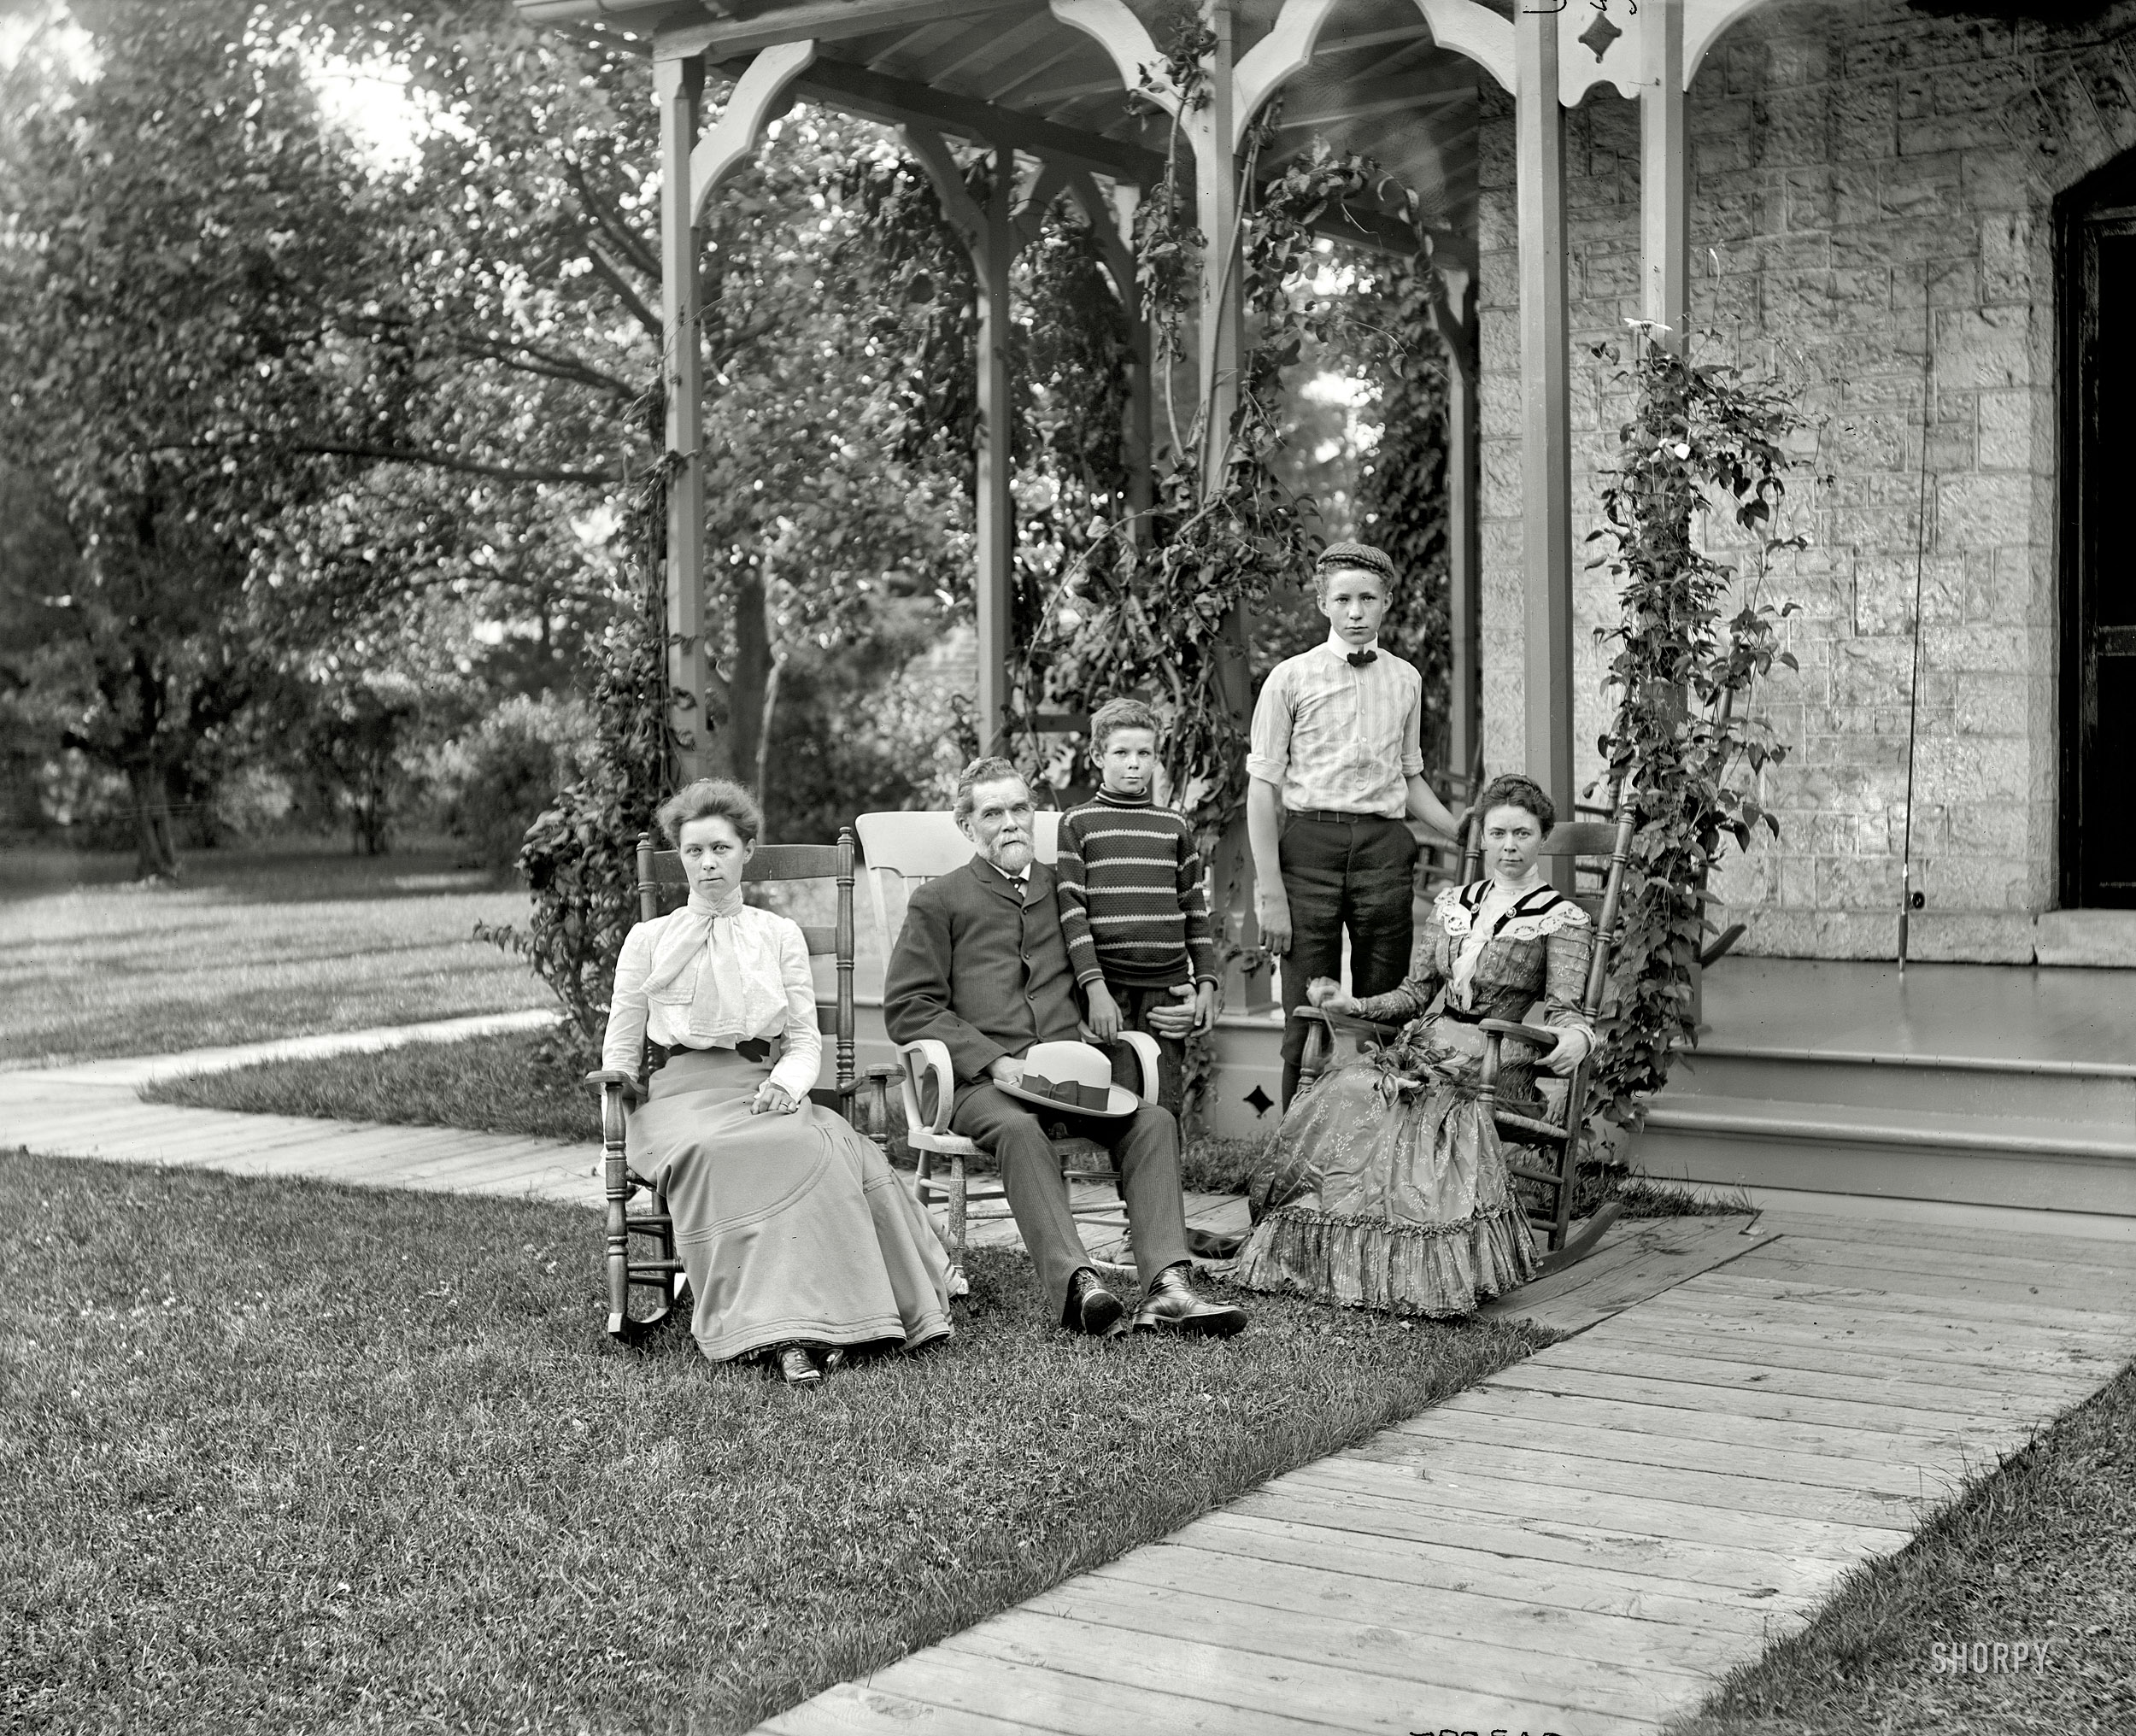 Grosse Ile, Michigan, circa 1900. "Group at Rio Vista." The Great Lakes shipping magnate and Dime Savings Bank founder William Livingstone and family. 8x10 inch dry plate glass negative, Detroit Publishing Company. View full size.